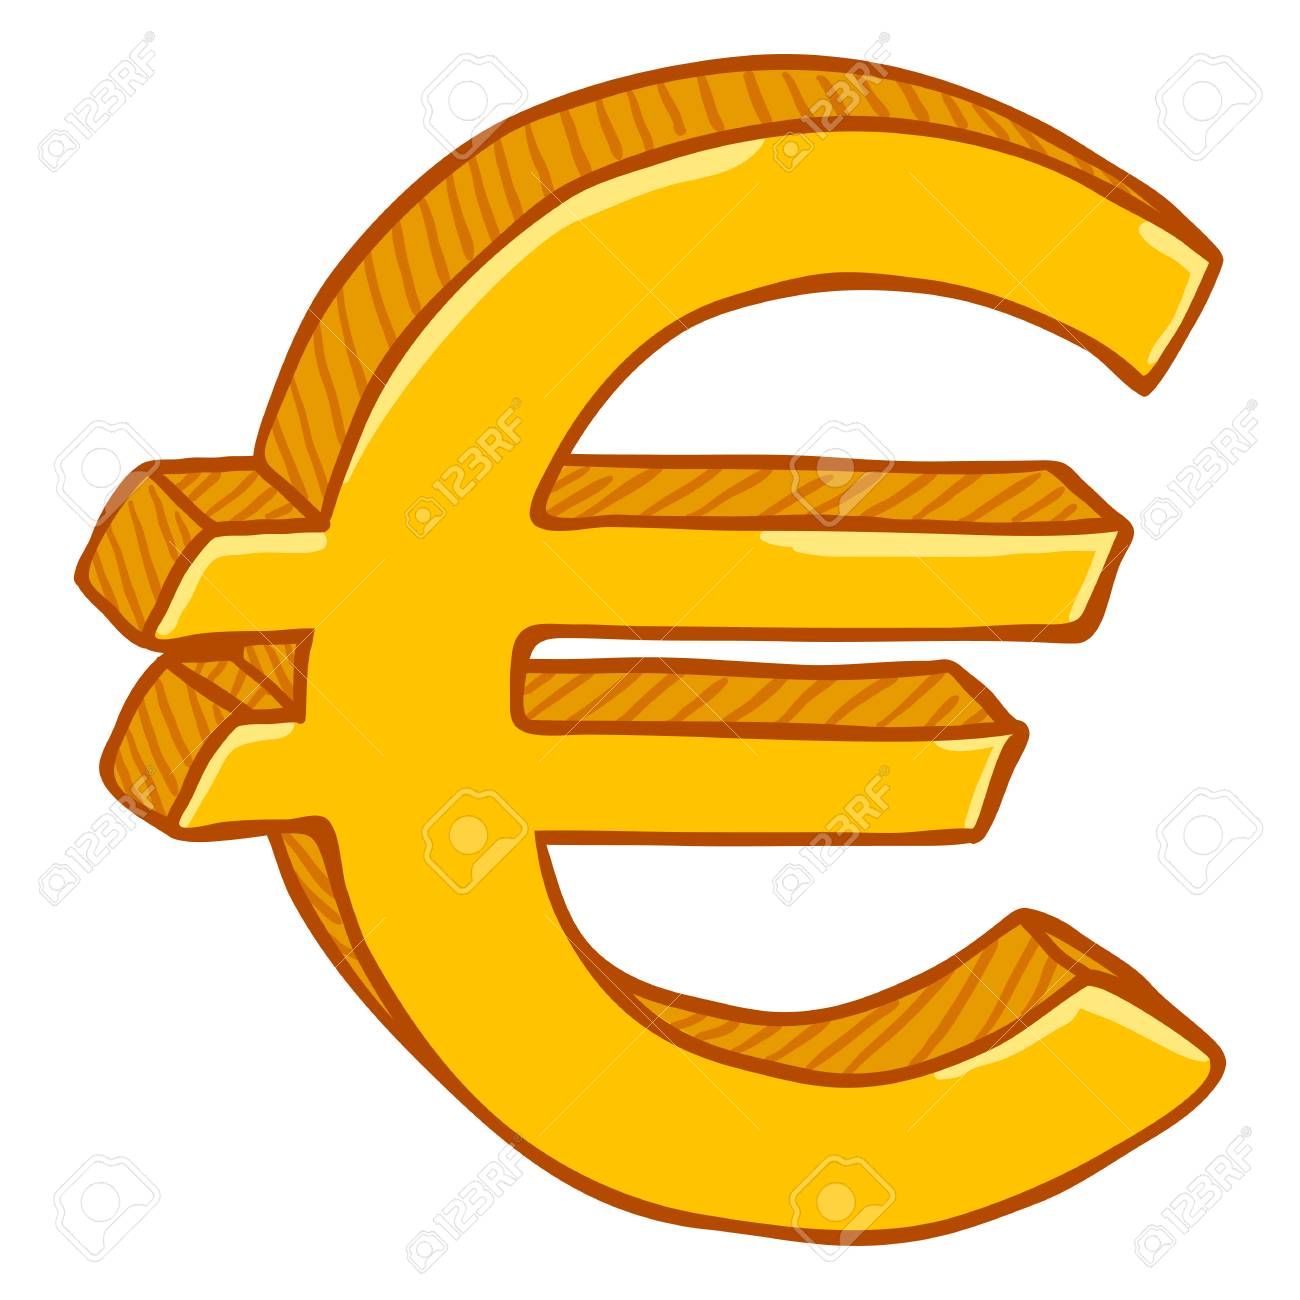 What Is The Sign For The Euro